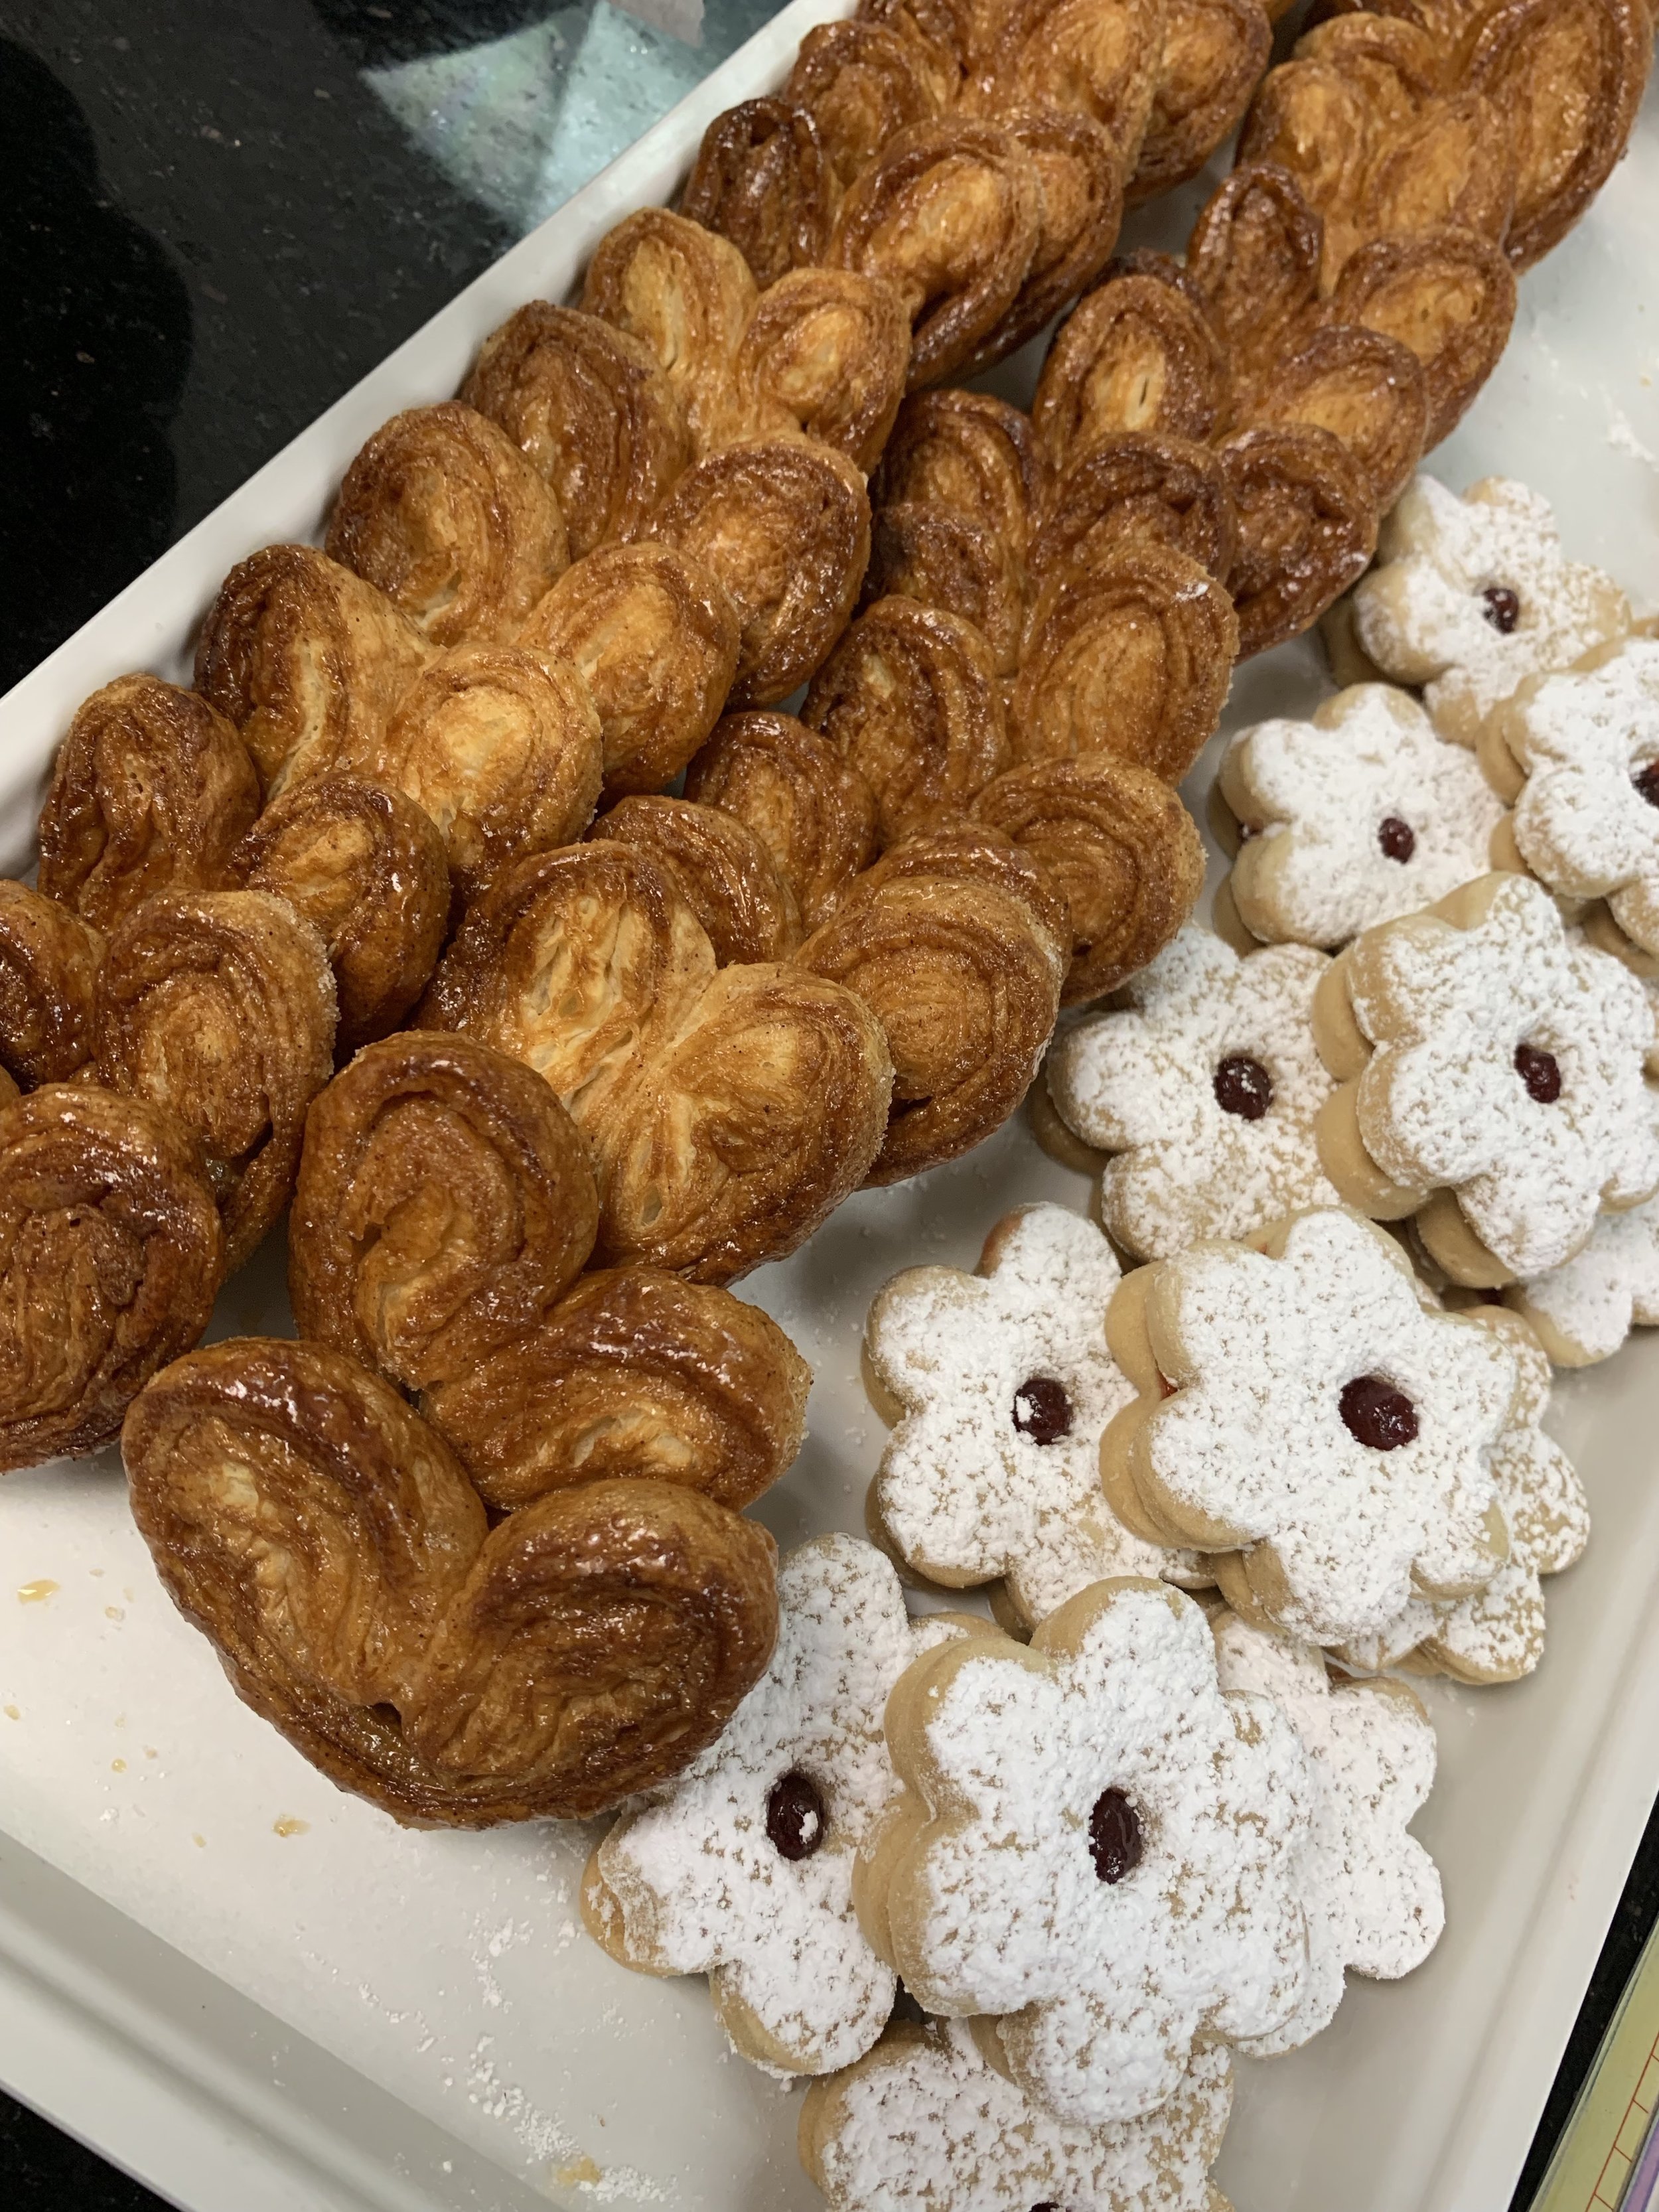 Palmier and Linzer tarts